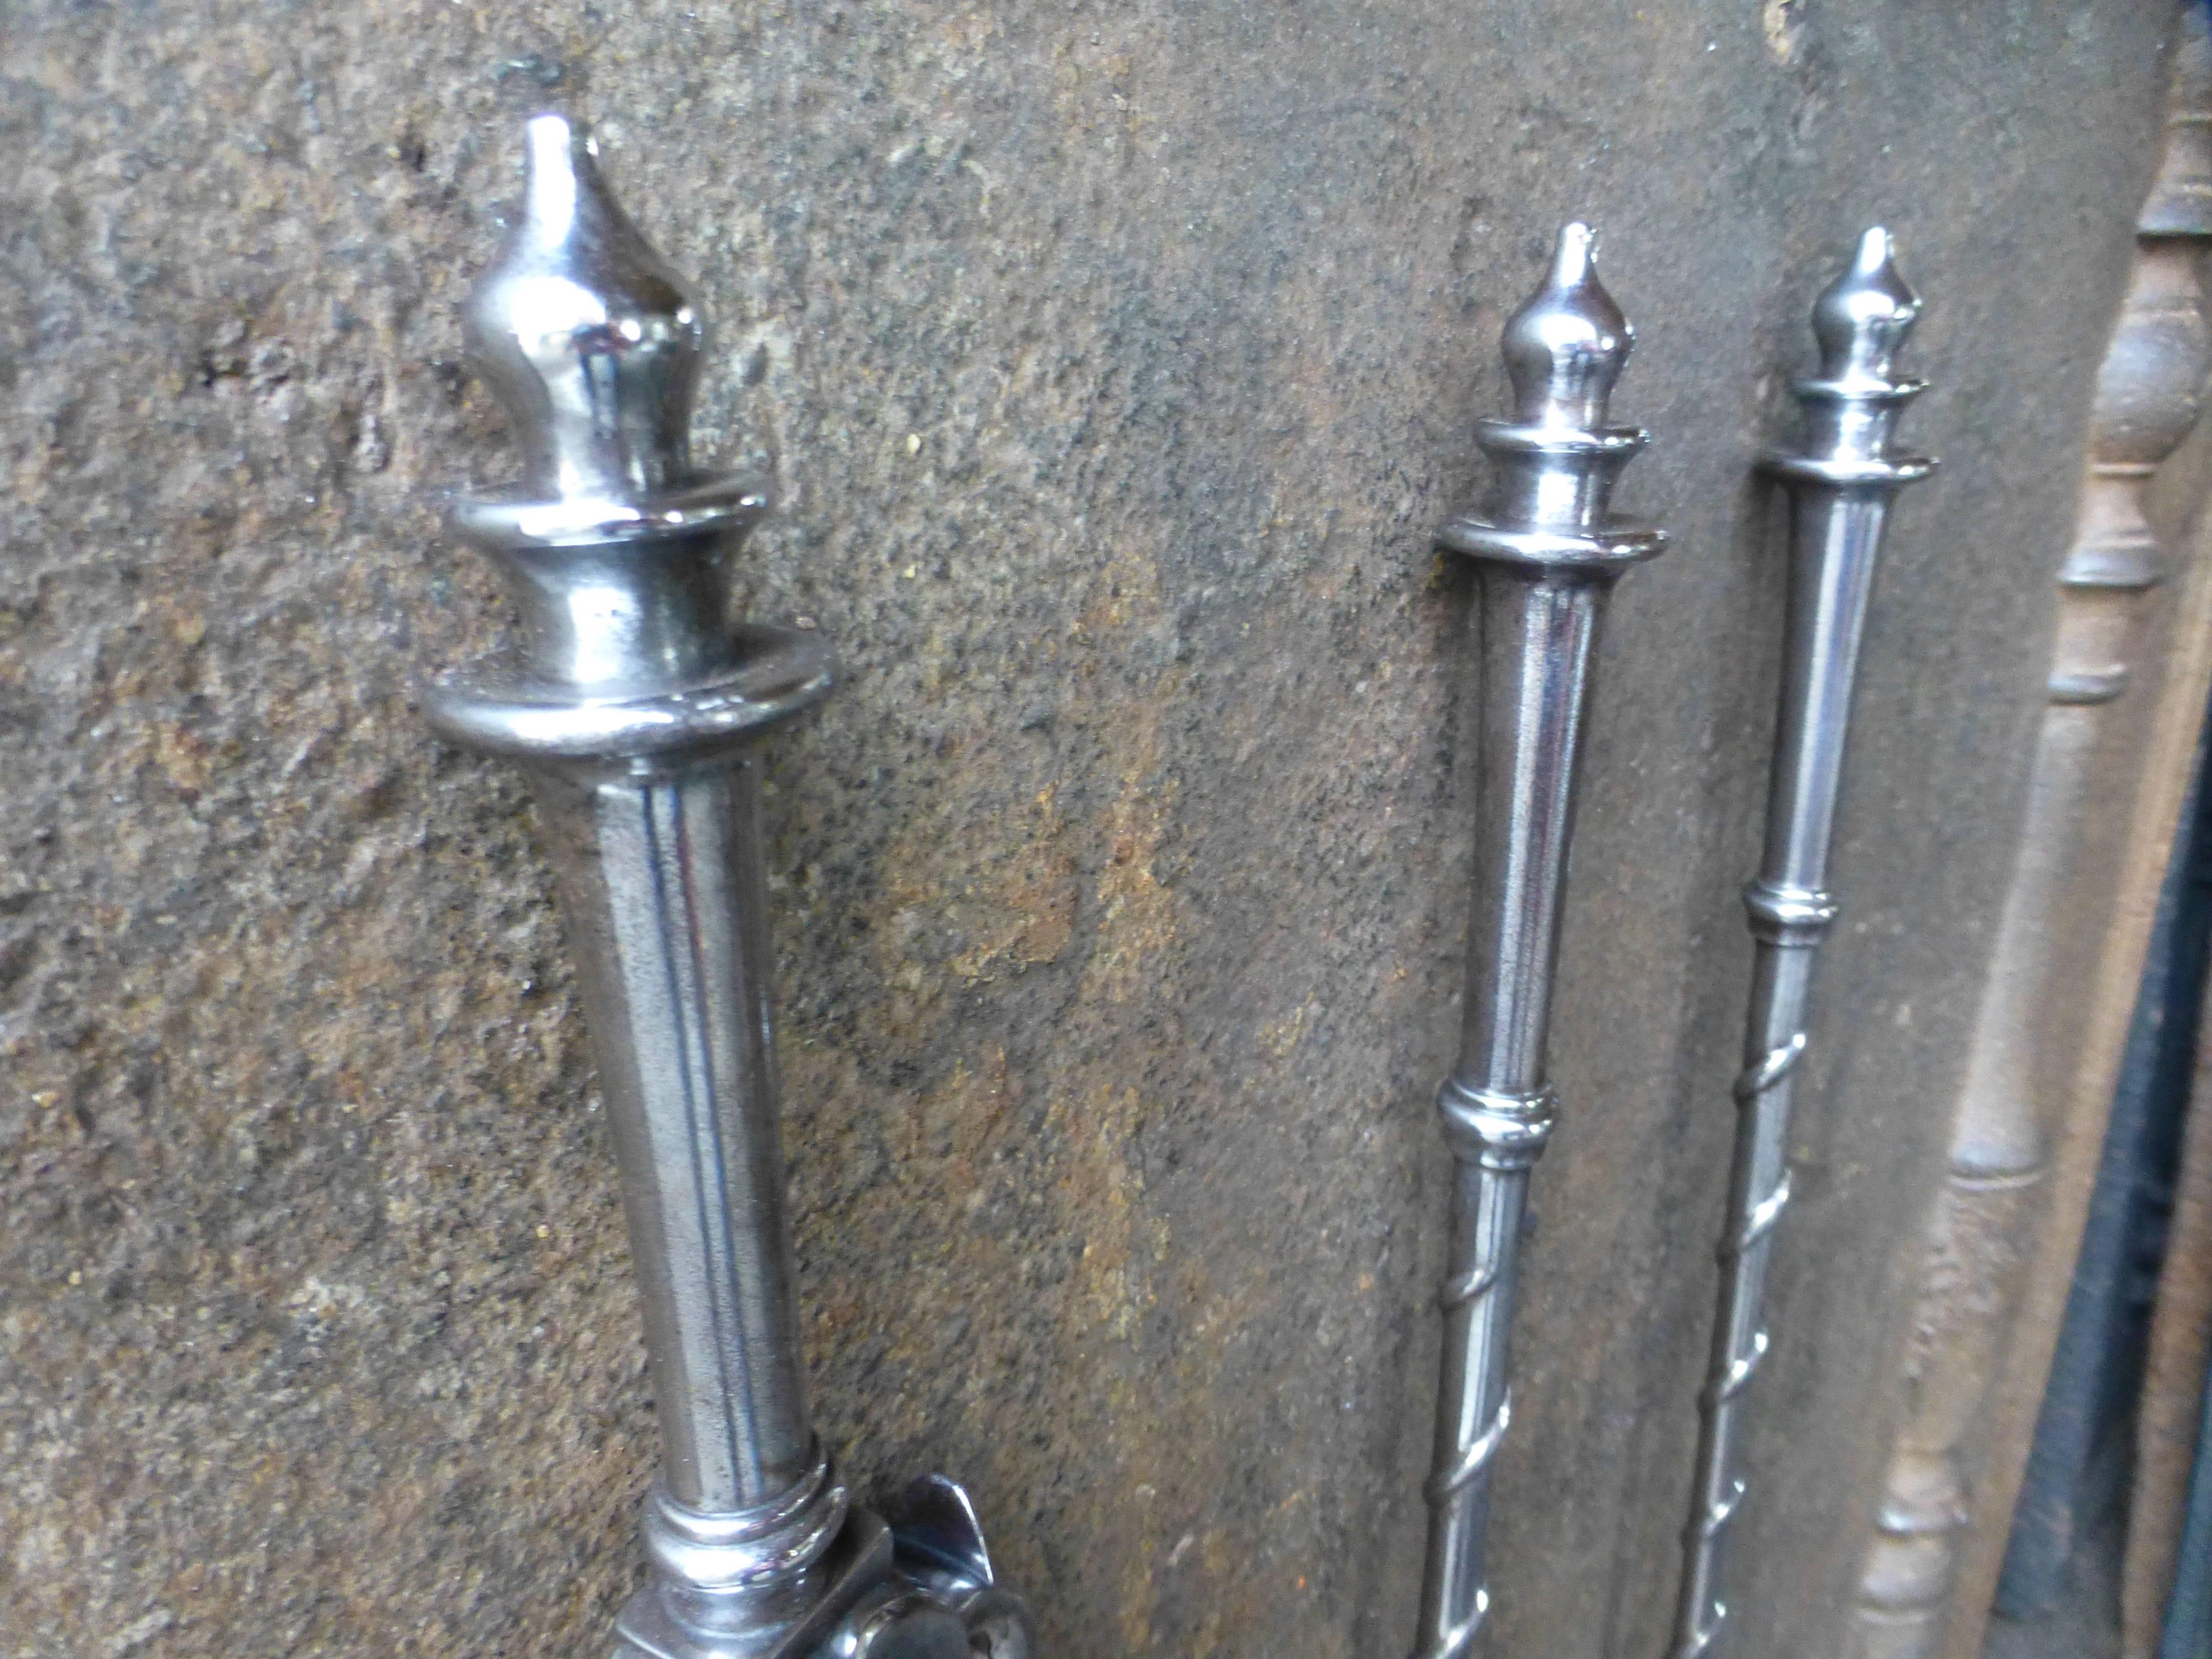 19th century English fire tools, fire irons made of polished steel.